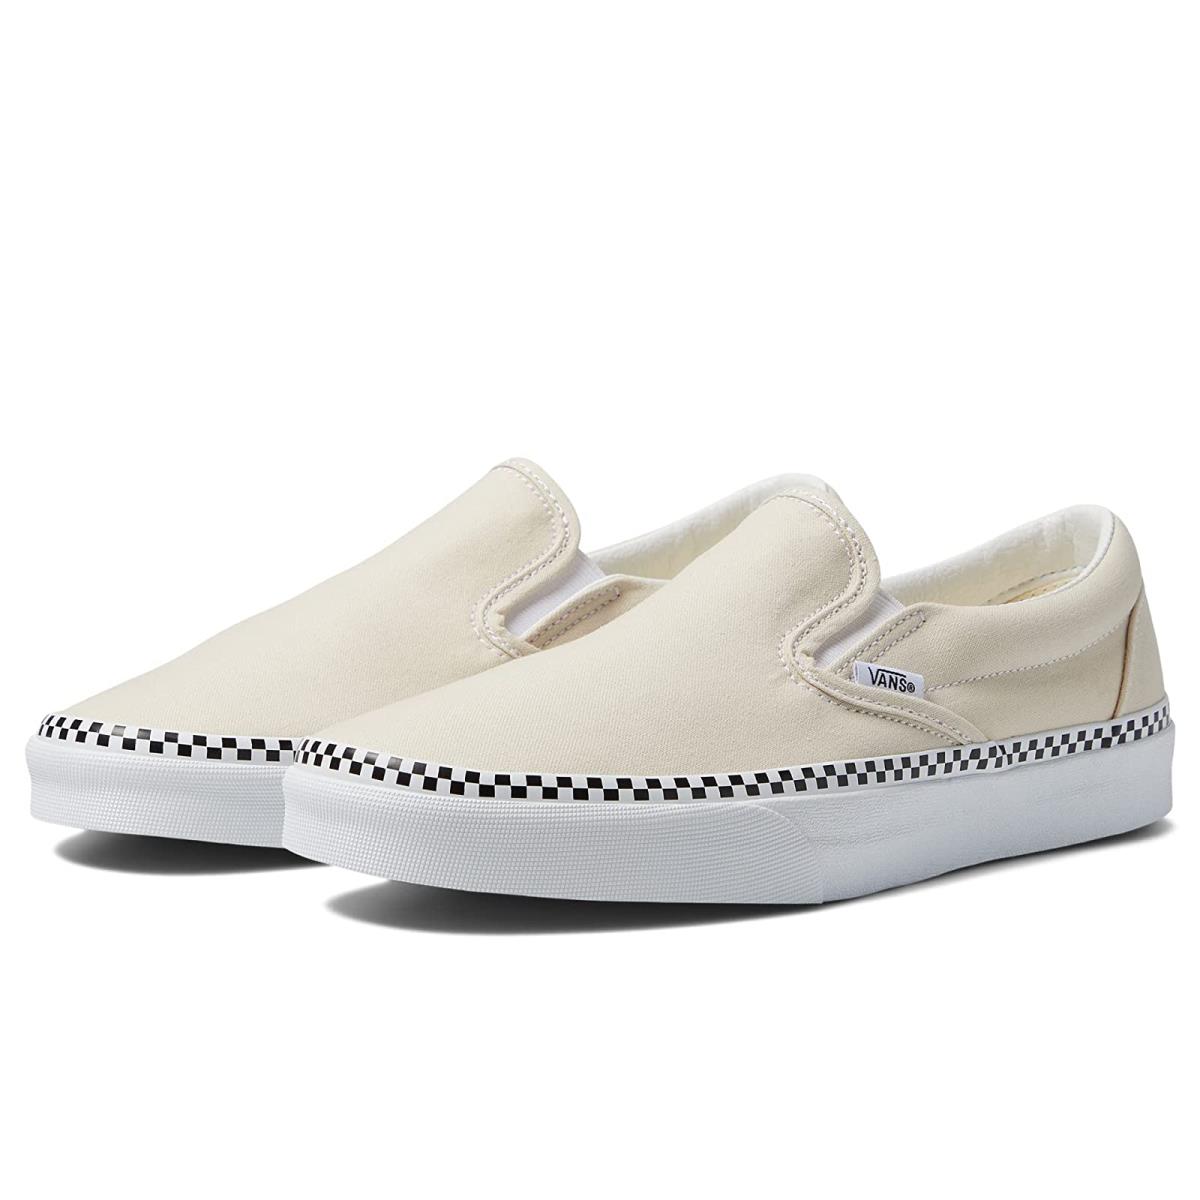 Unisex Sneakers Athletic Shoes Vans Classic Slip-on Checkerboard Foxing Turtledove